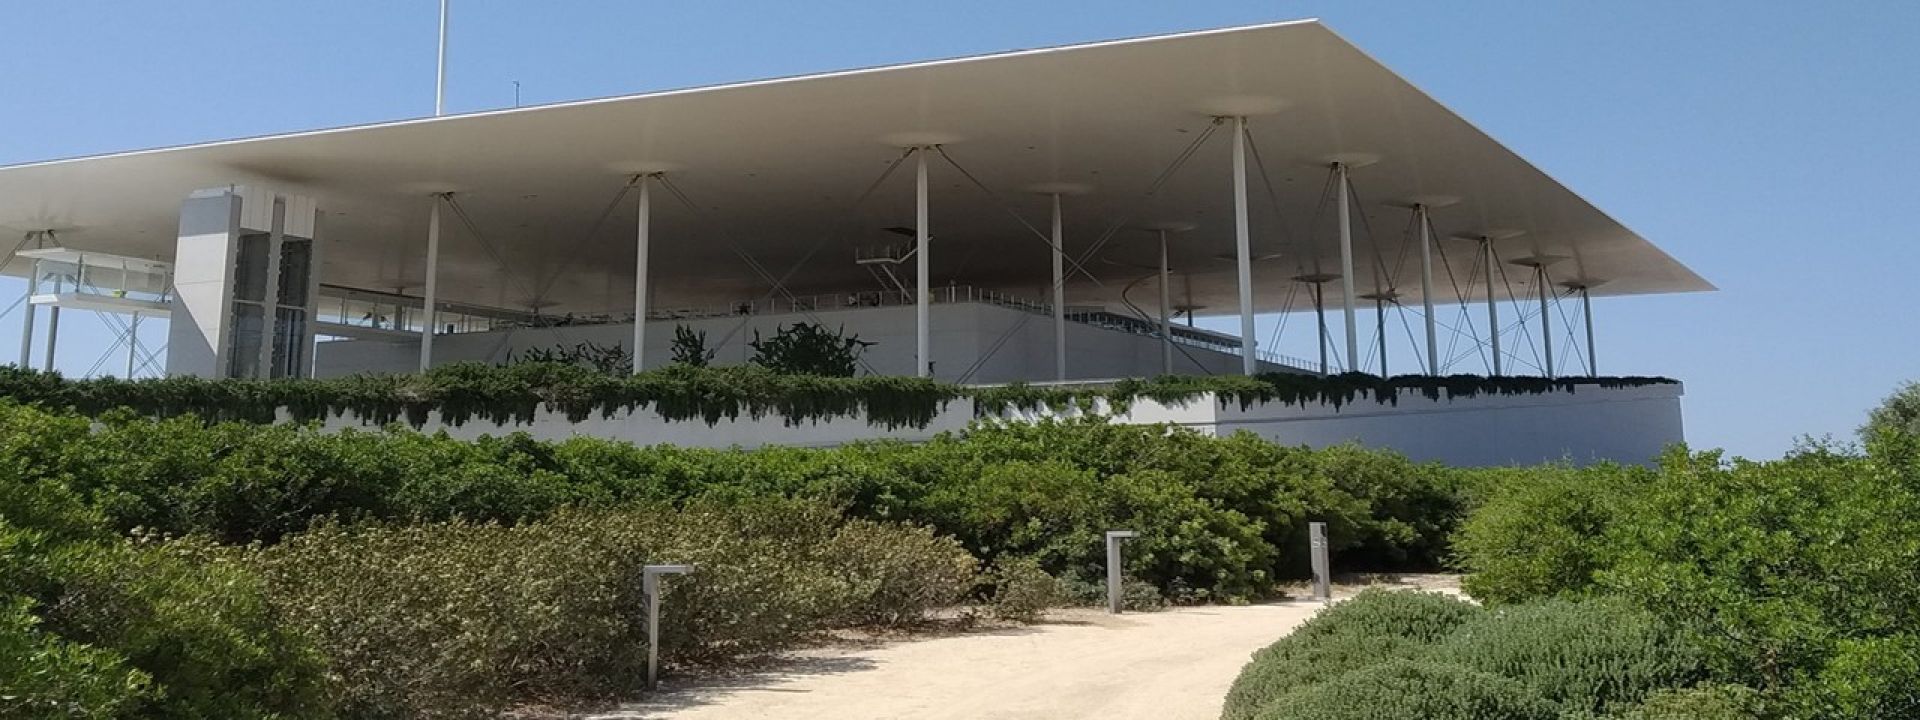 Guided Tours at the Stavros Niarchos Foundation Cultural Center - Εικόνα